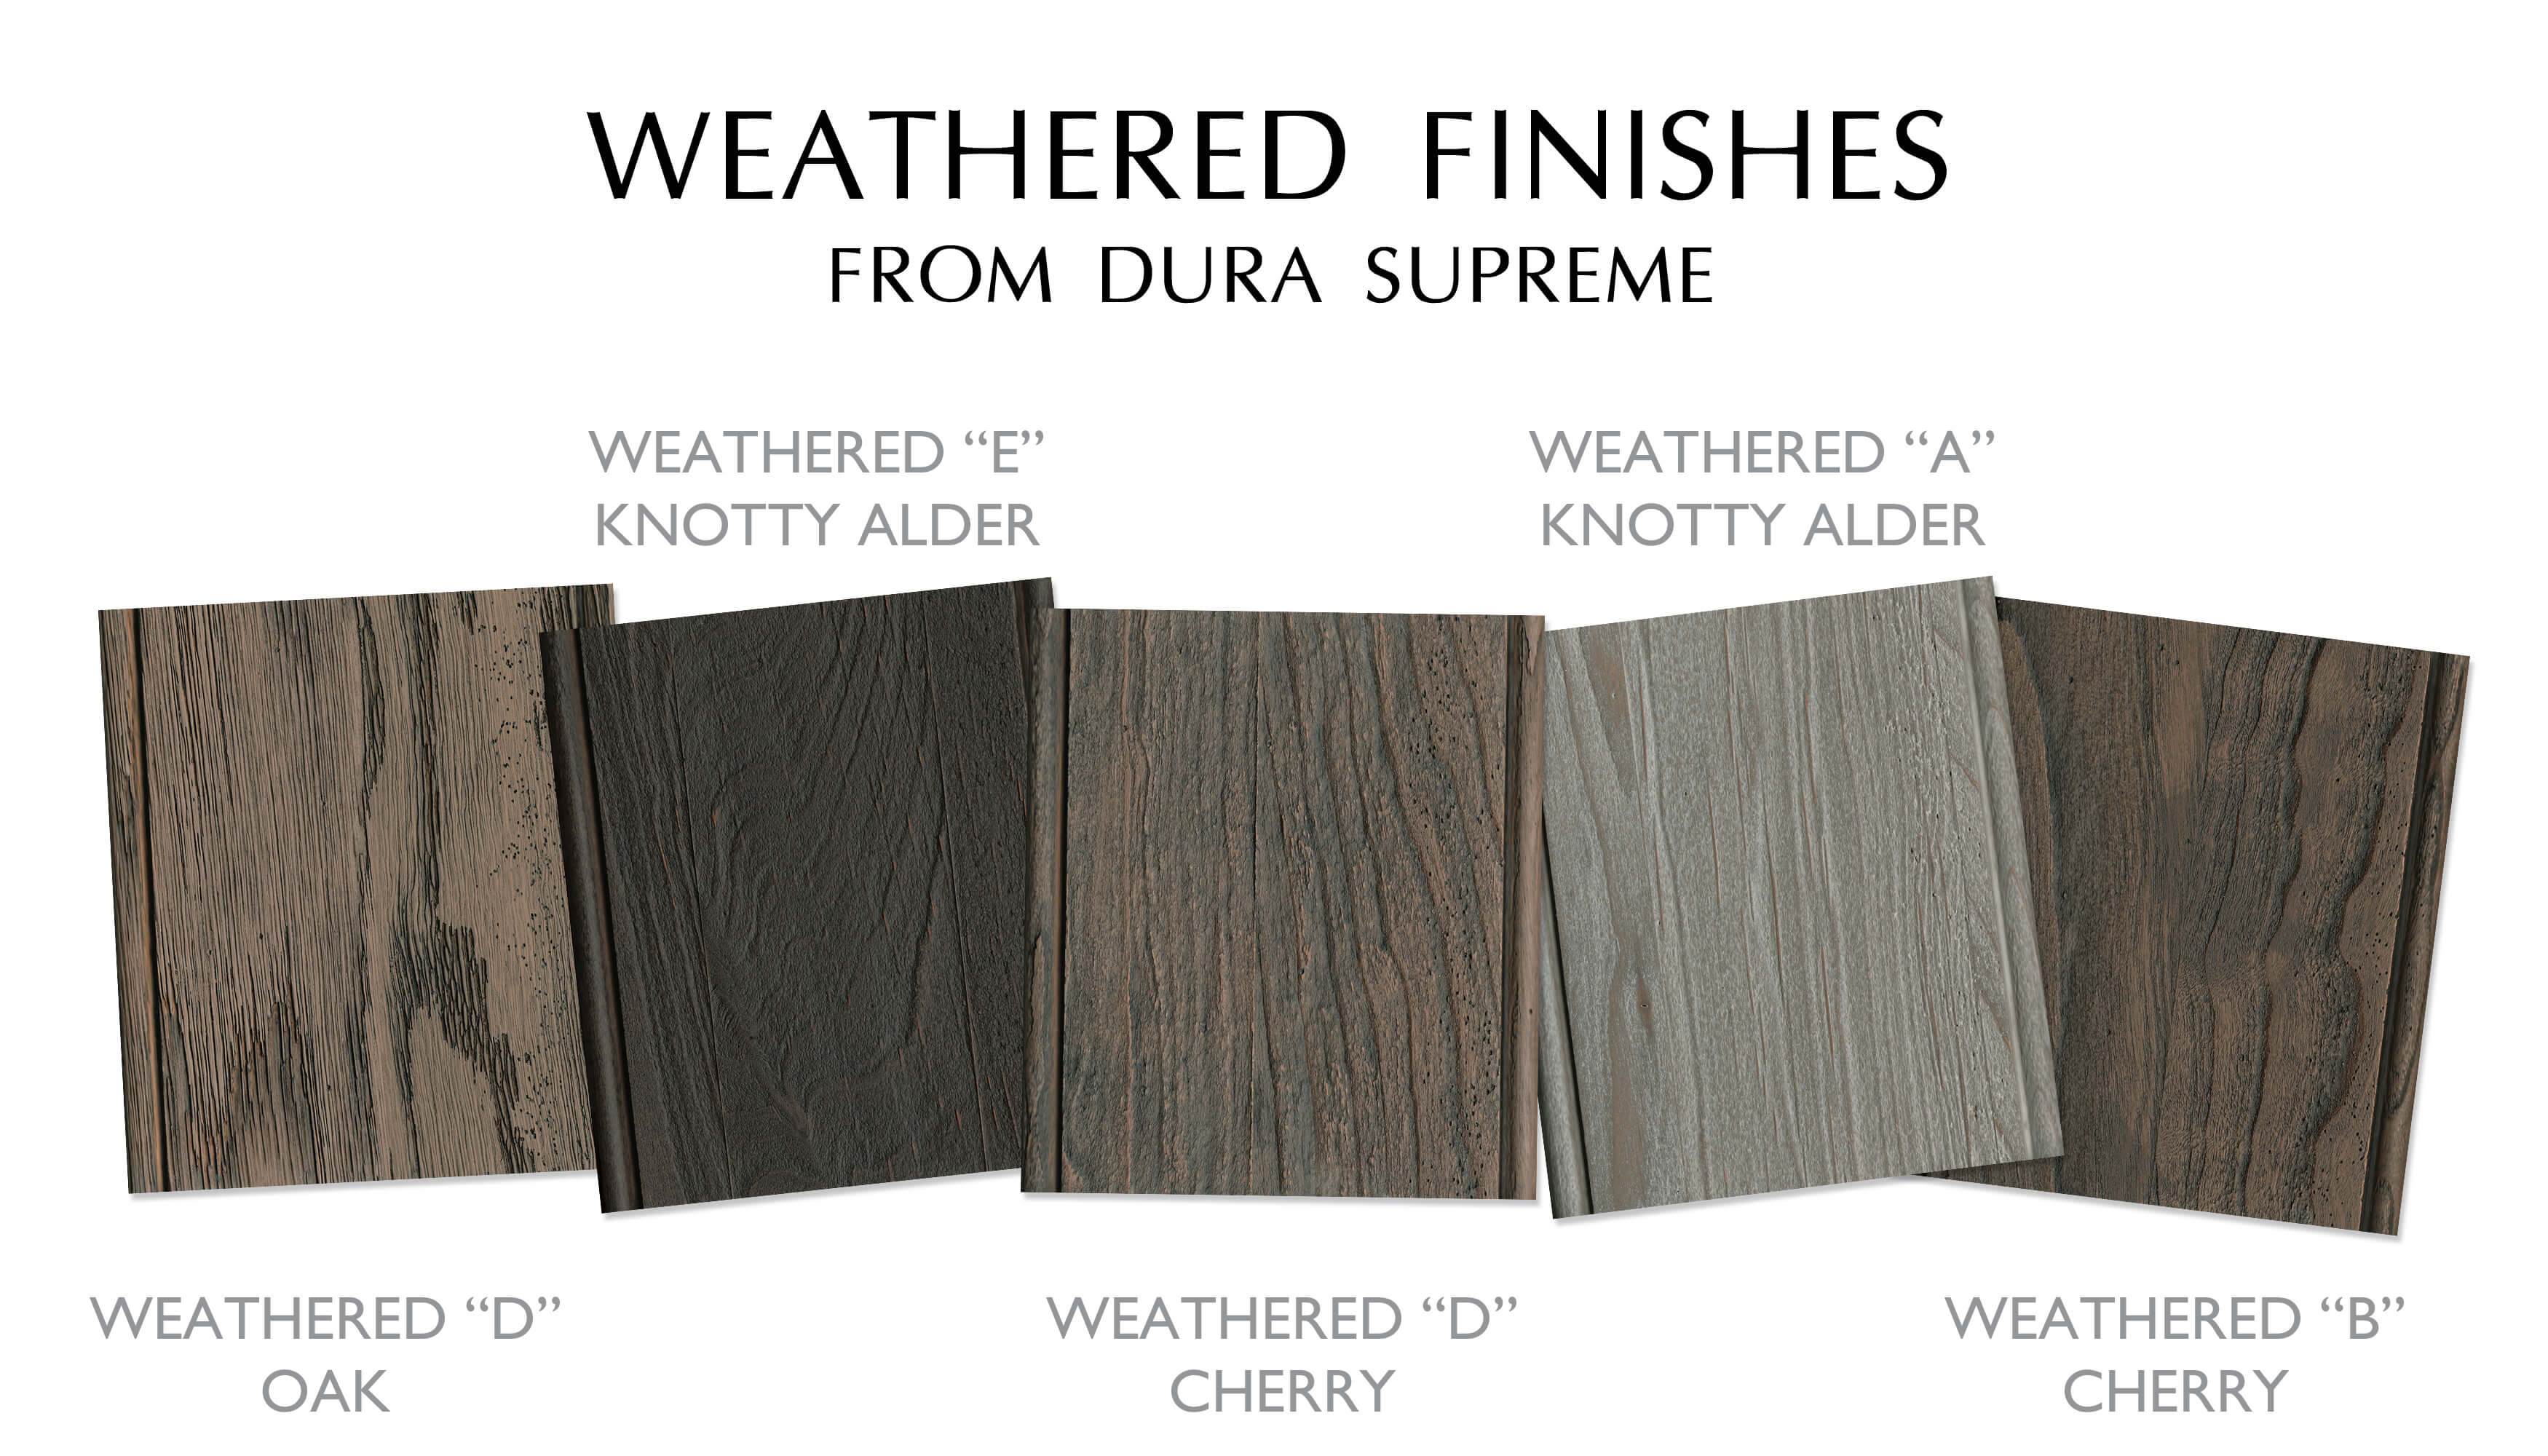 Dura Supreme Weathered Finishes for Kitchen and Bath Cabinets